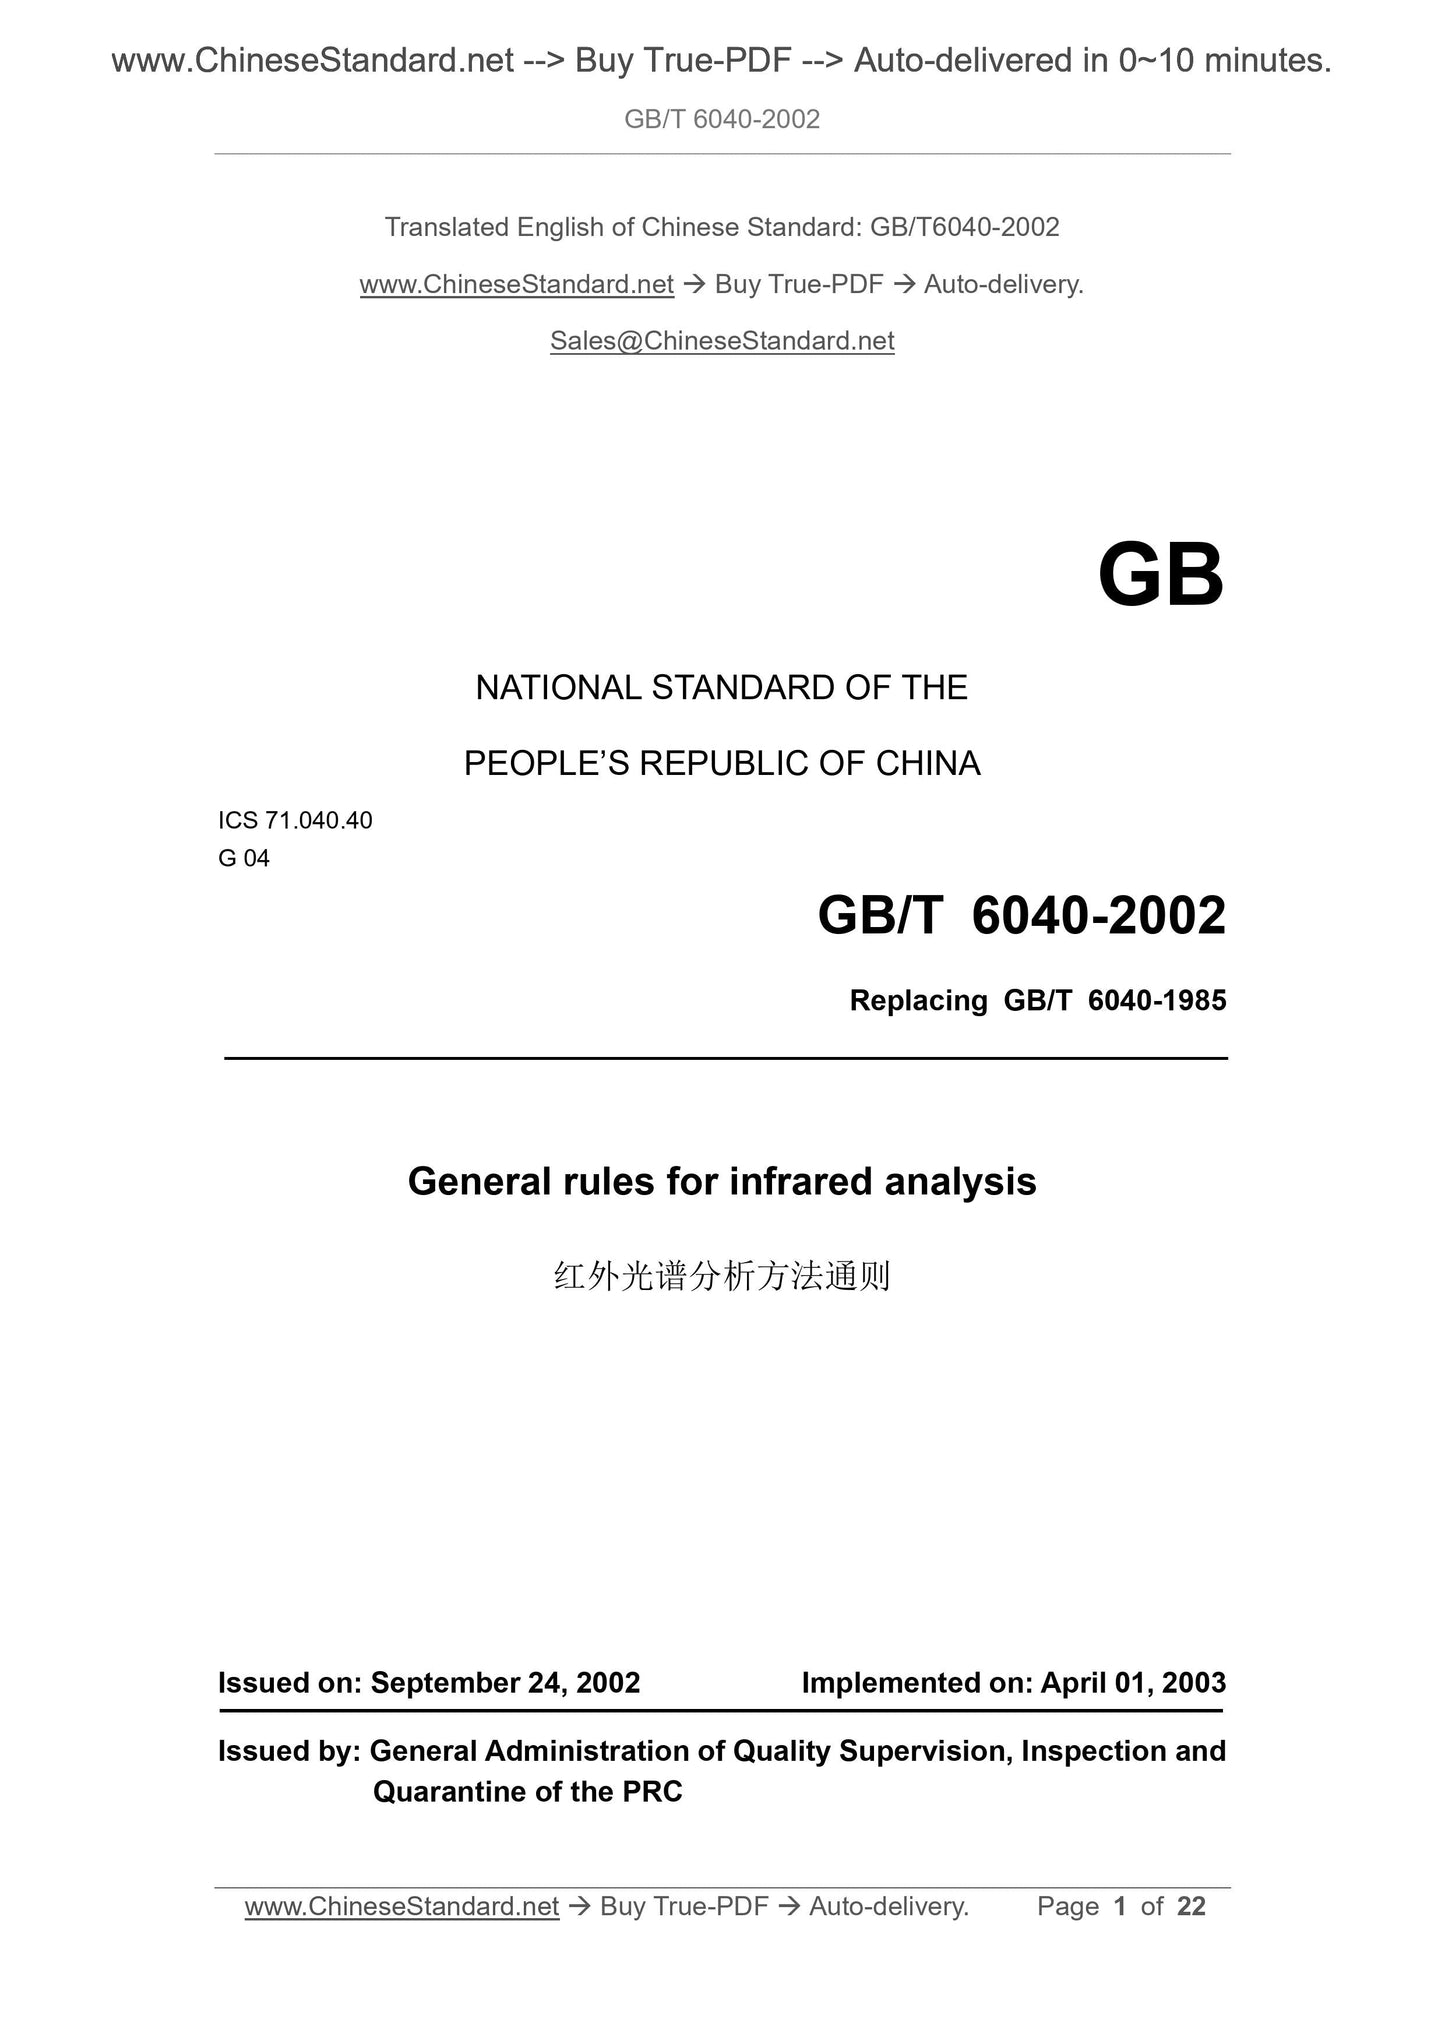 GB/T 6040-2002 Page 1